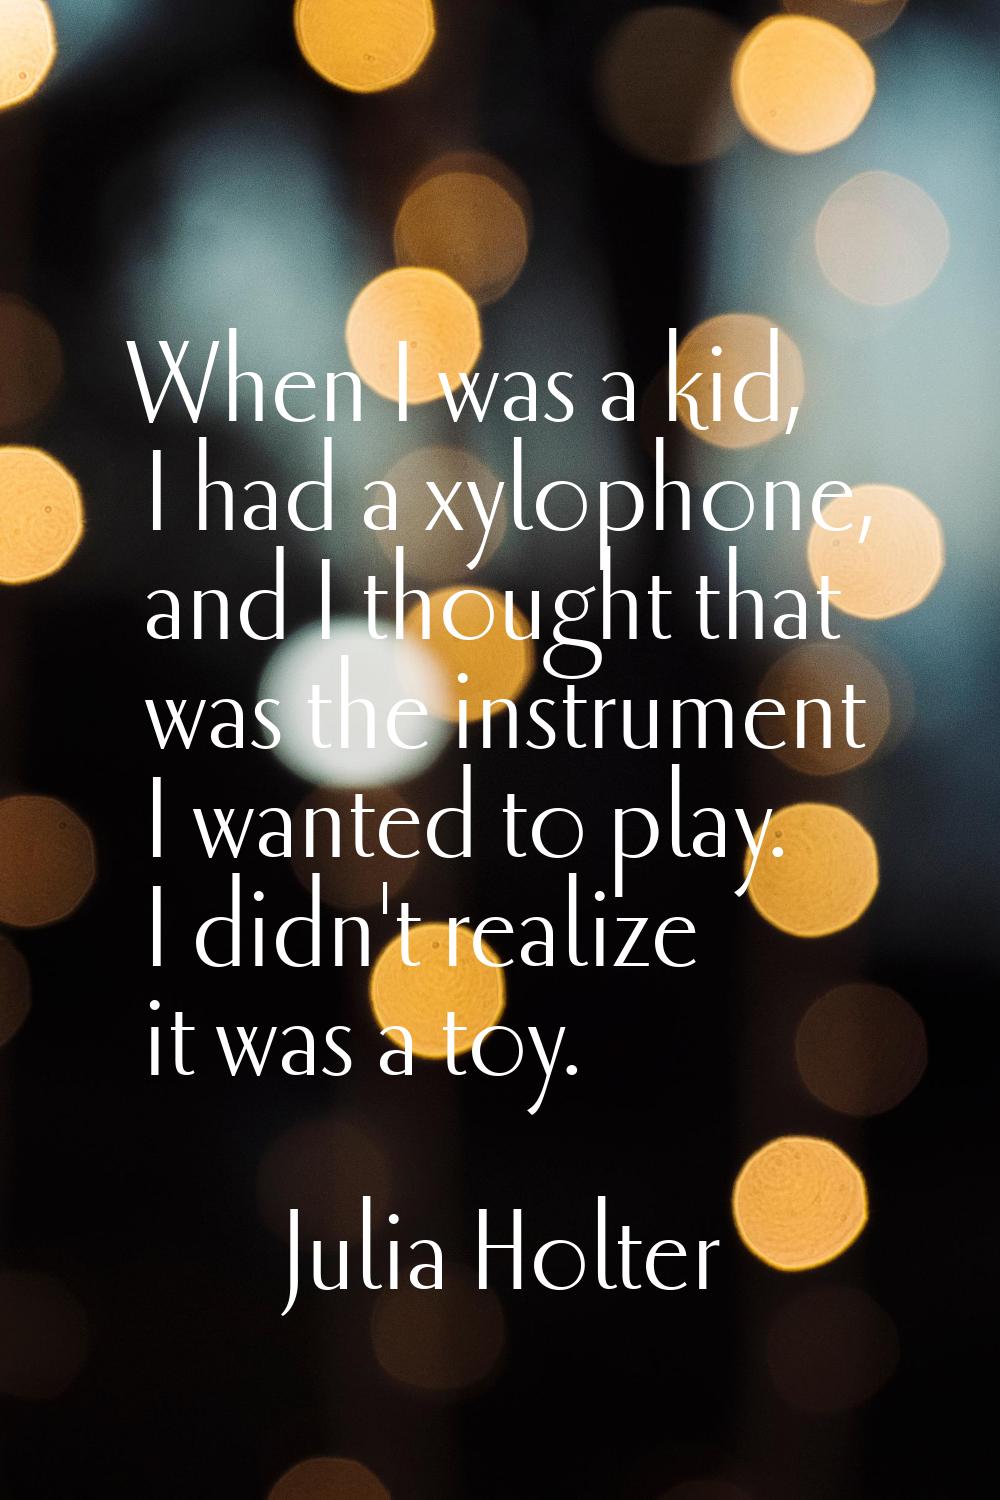 When I was a kid, I had a xylophone, and I thought that was the instrument I wanted to play. I didn